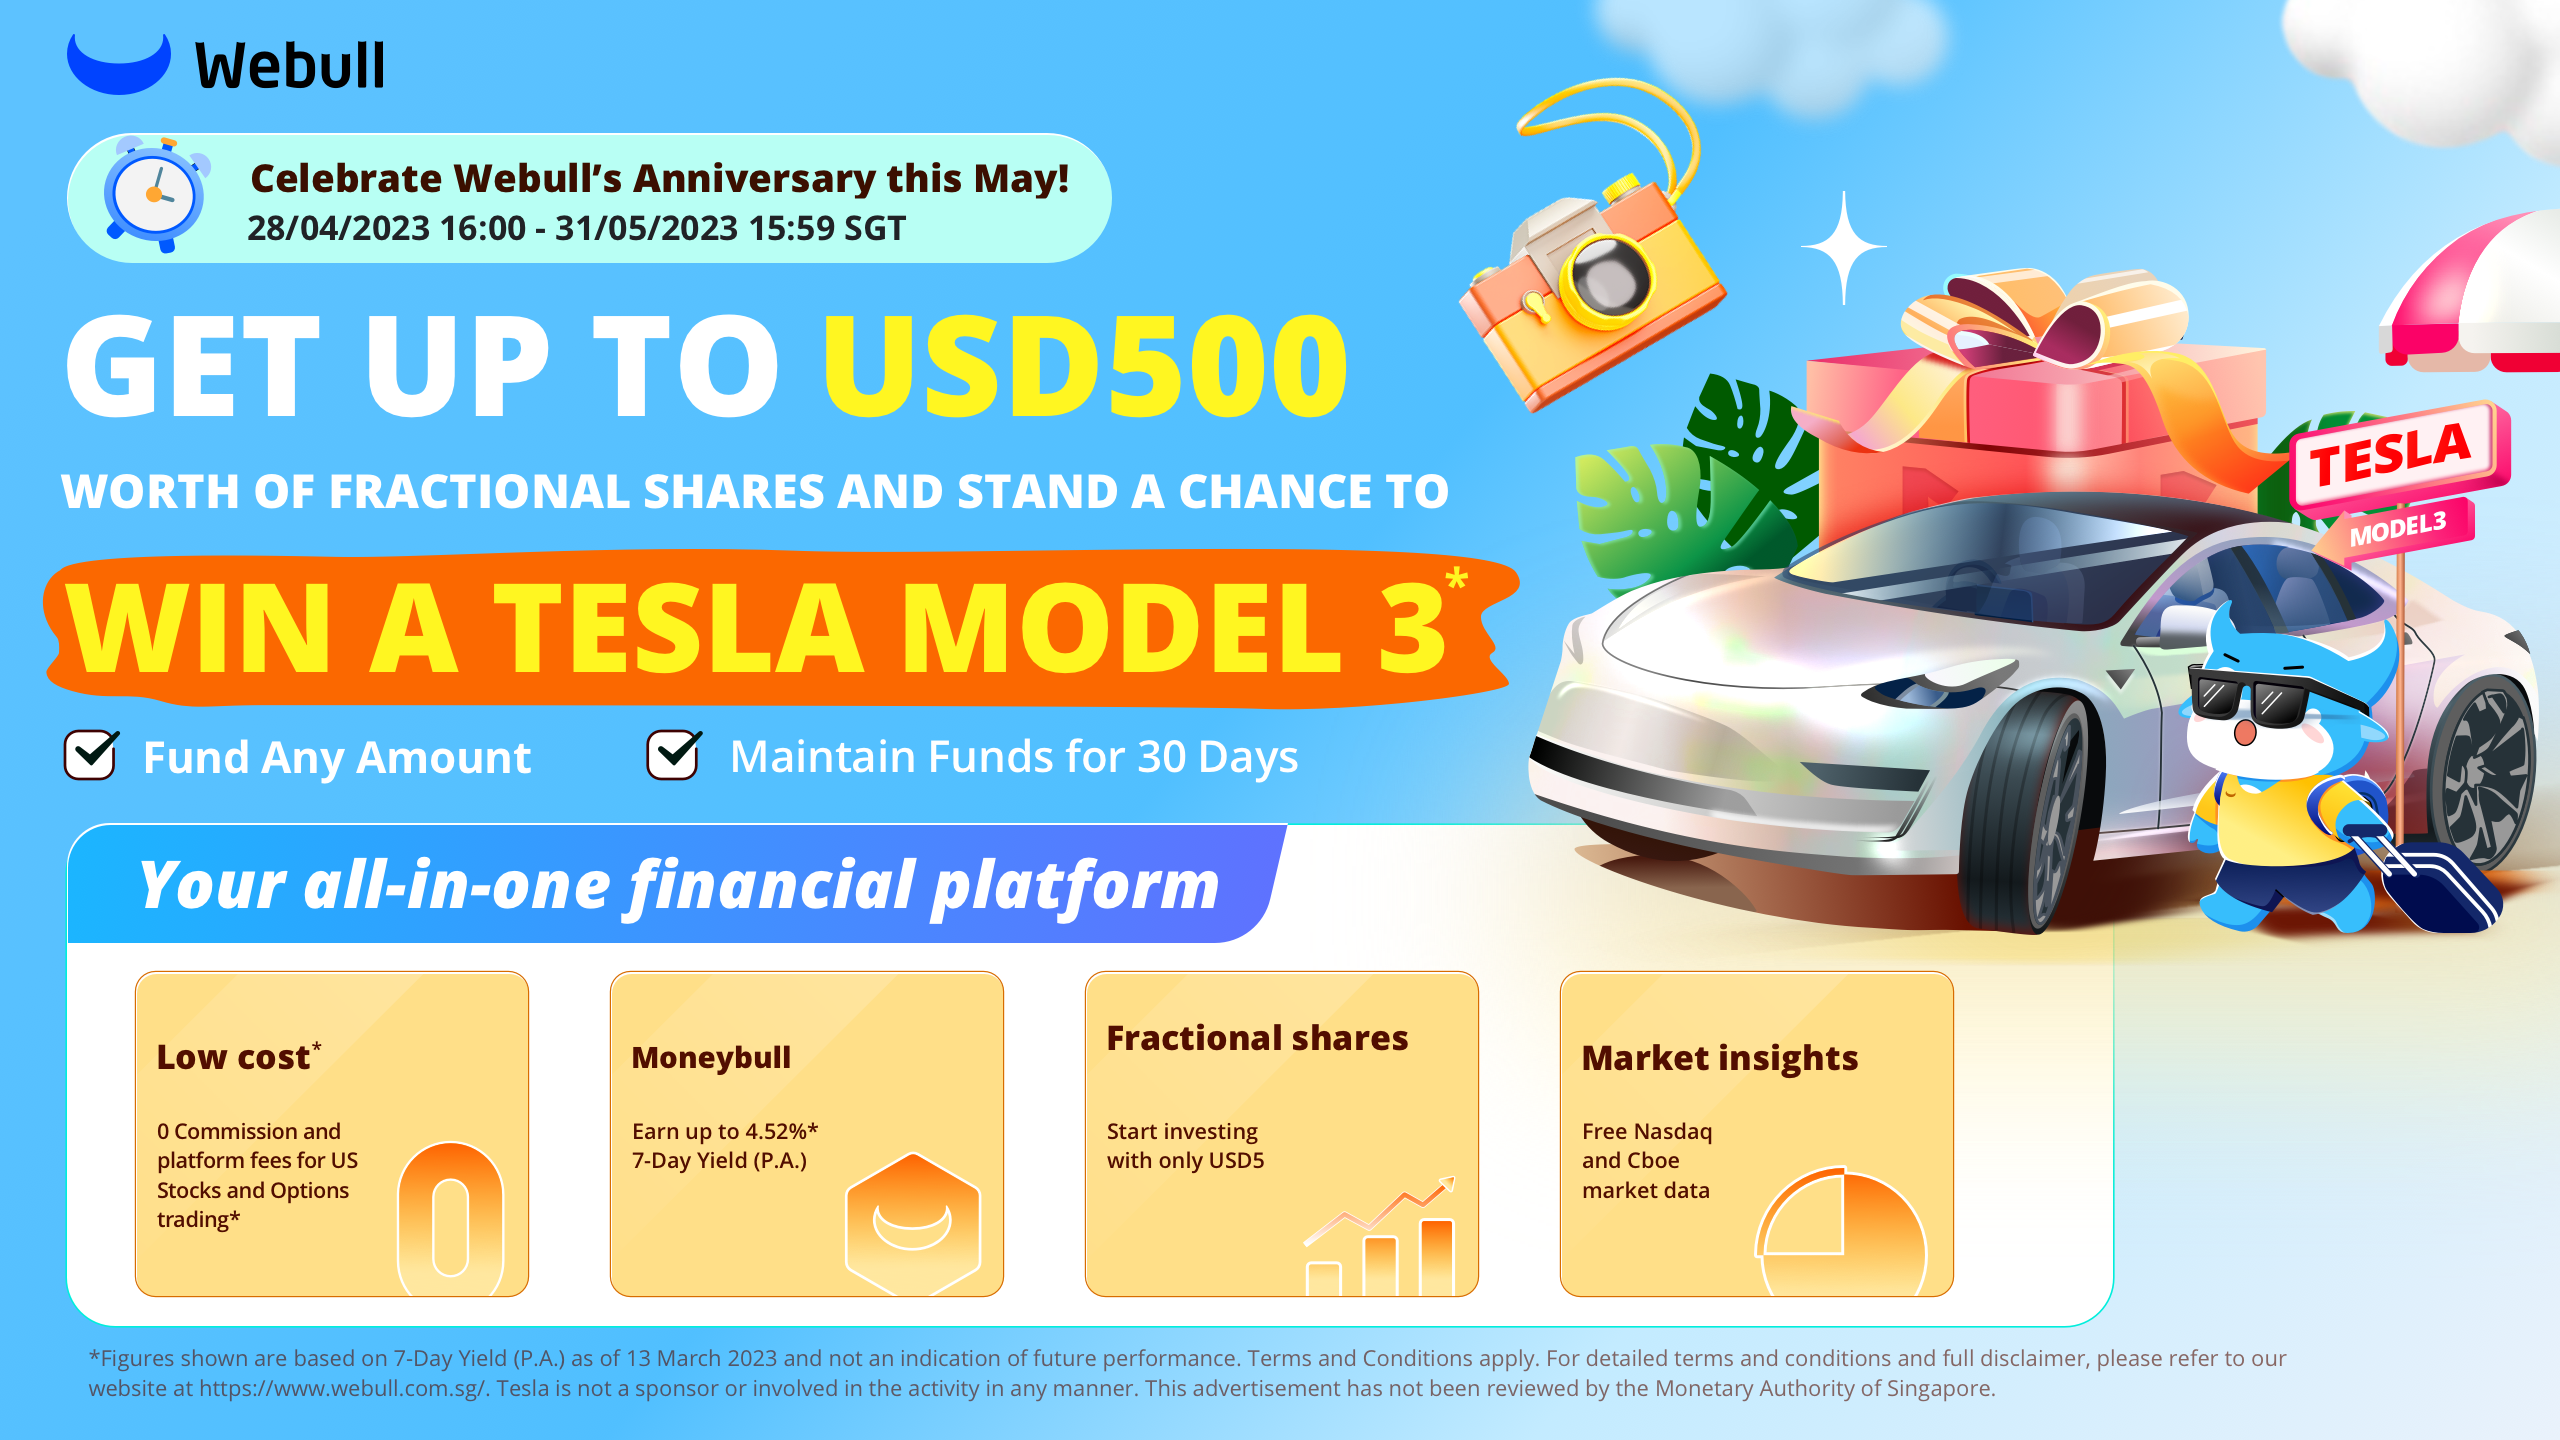 Webull - Get up to USD500 and a chance to win a Tesla Model 3*